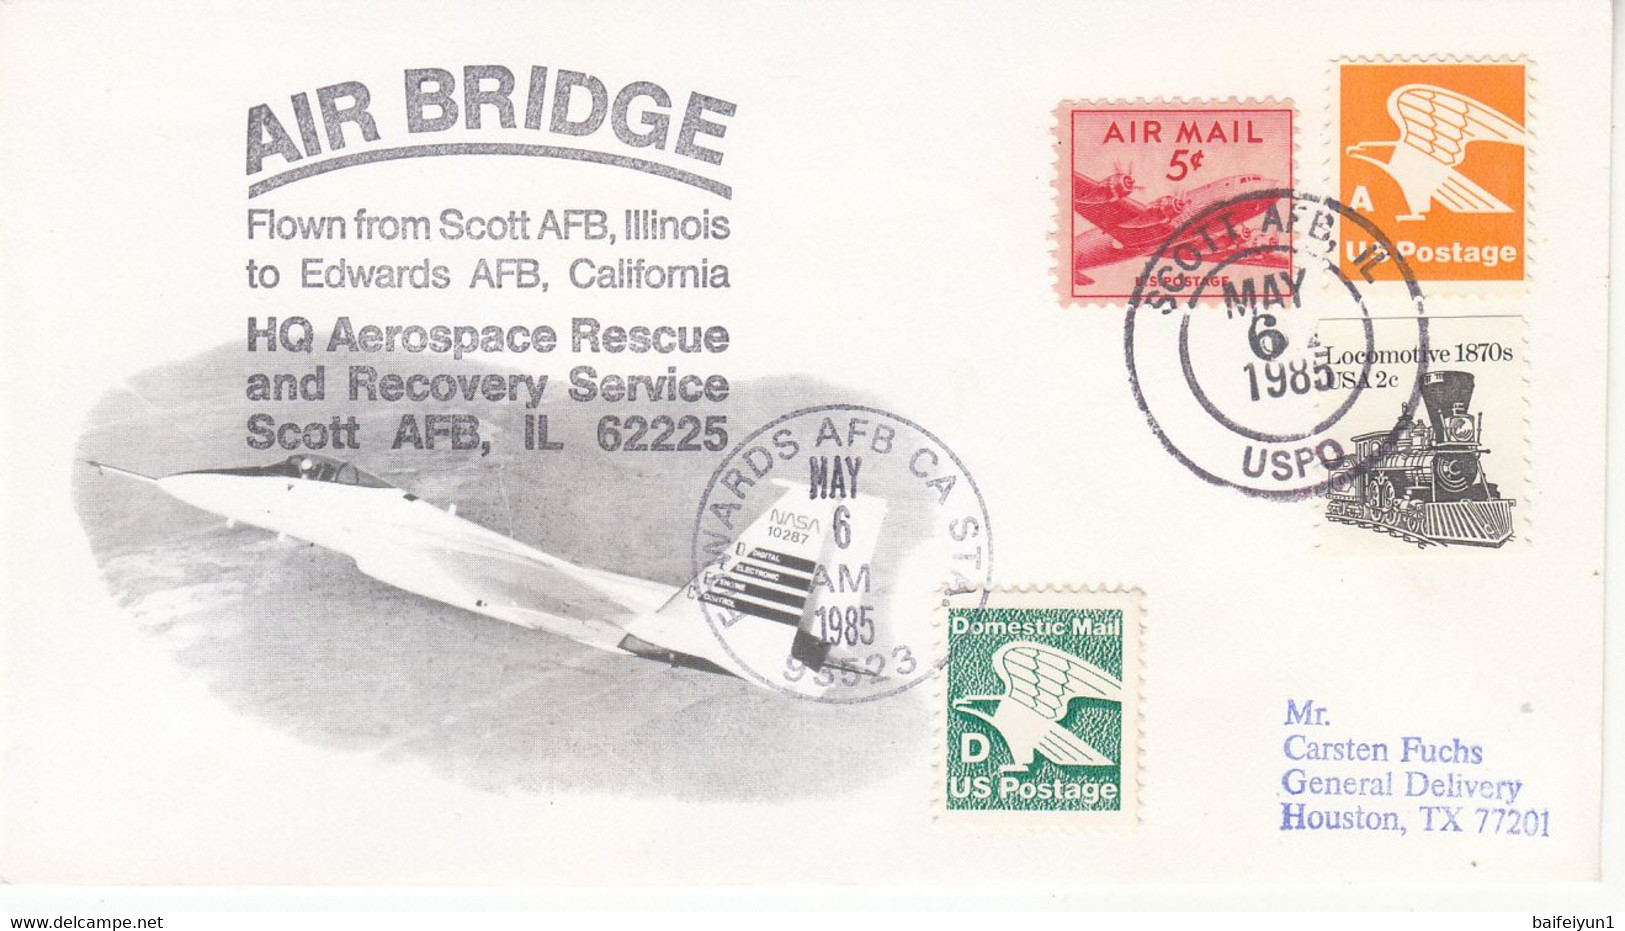 1985 USA  Space Shuttle Challenger STS-51B  Mission And Air Bridge  Commemorative Cover - North  America